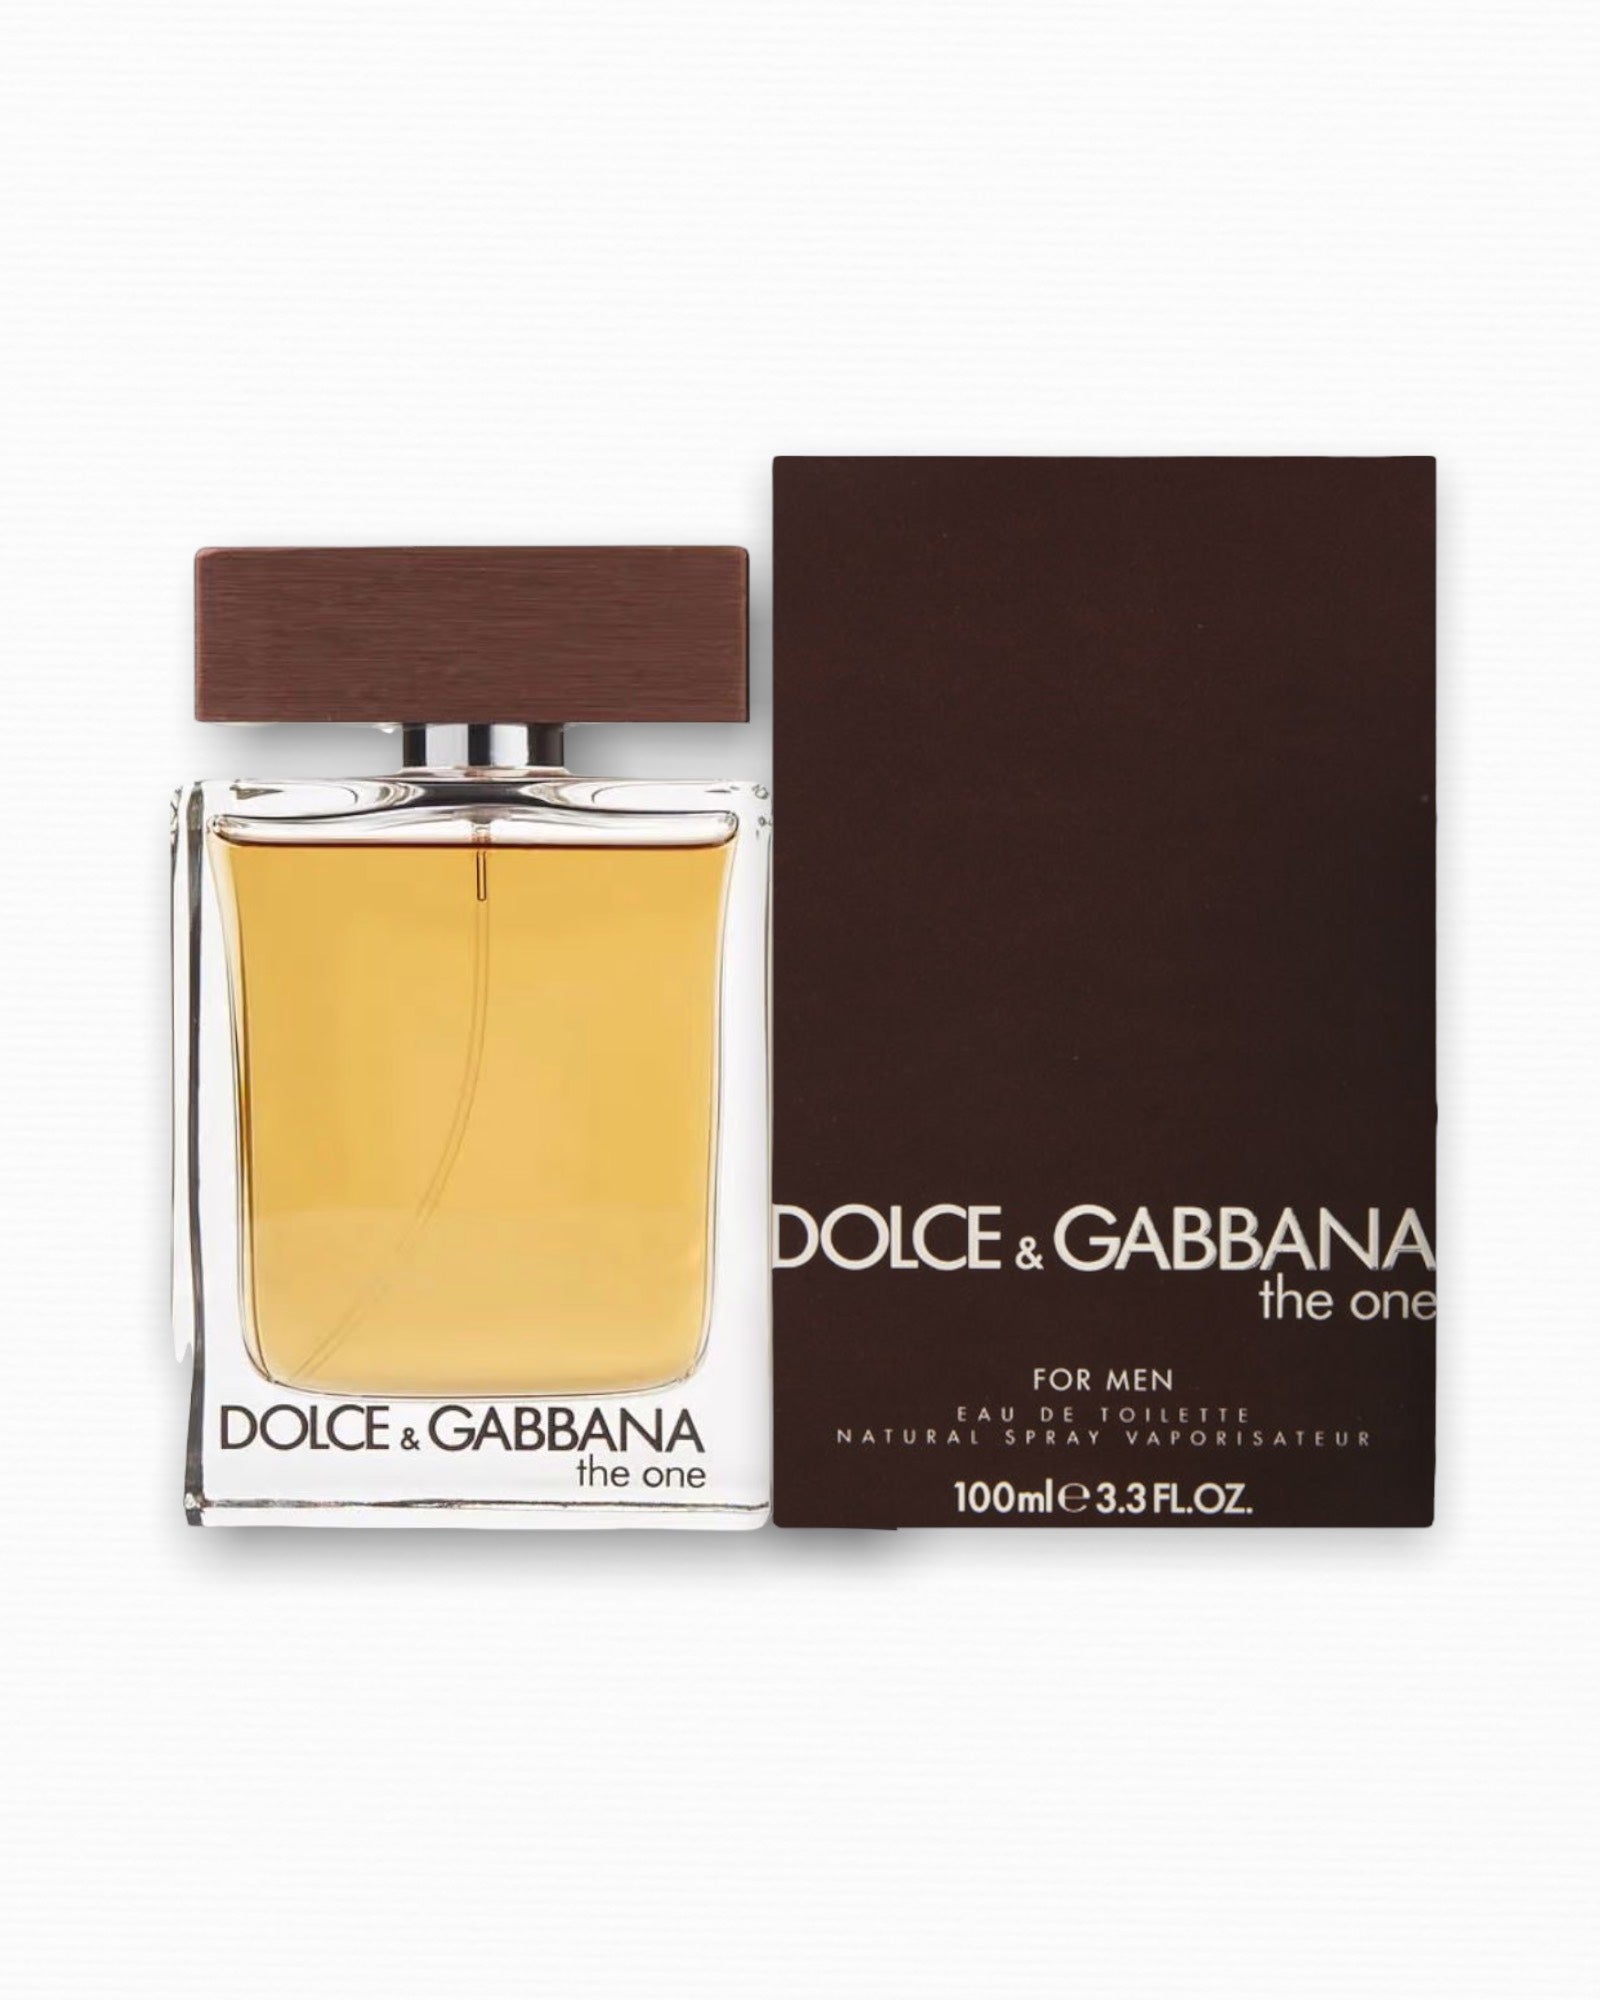 Dolce & Gabbana The One for Men EDT 3.3 oz